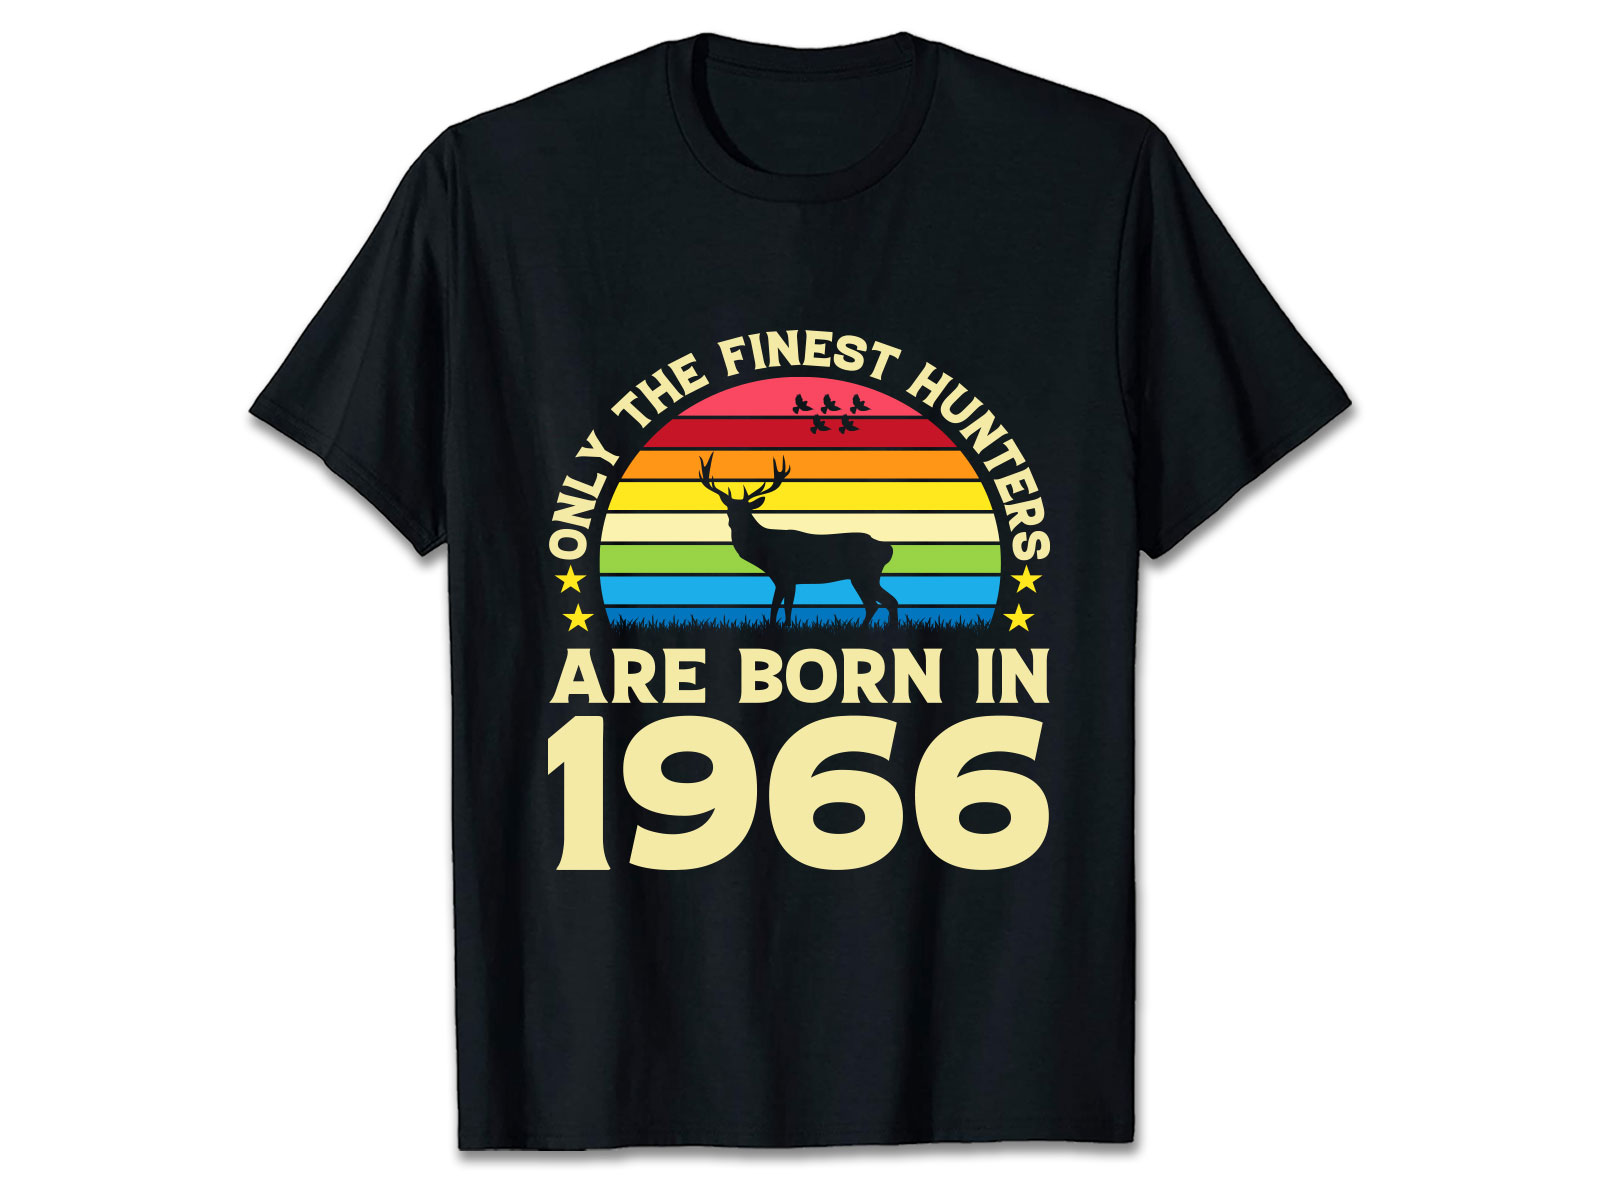 only the finest hunters are born in 1966 955